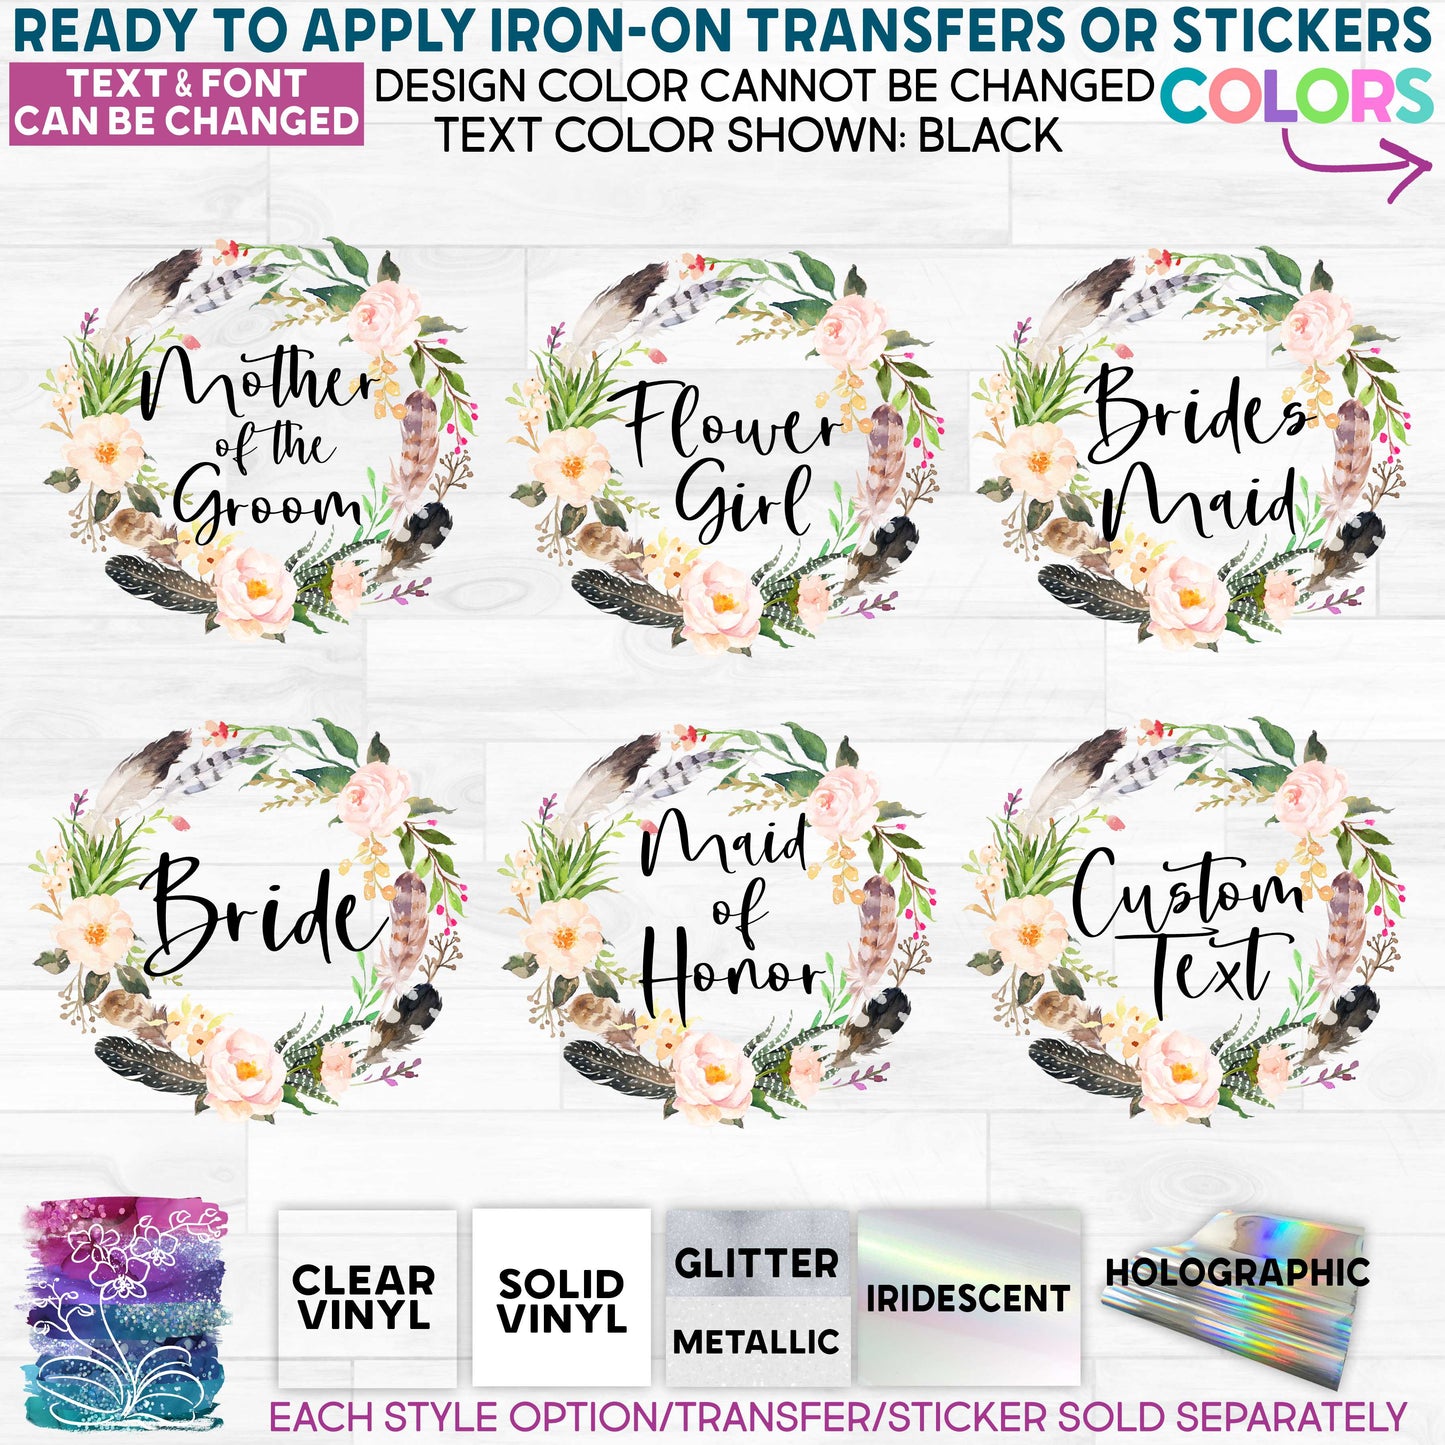 SBS-13-C Bride Bridesmaid Flower Girl Succulent Garden Flower Watercolor  Made-to-Order Iron-On Transfer or Sticker